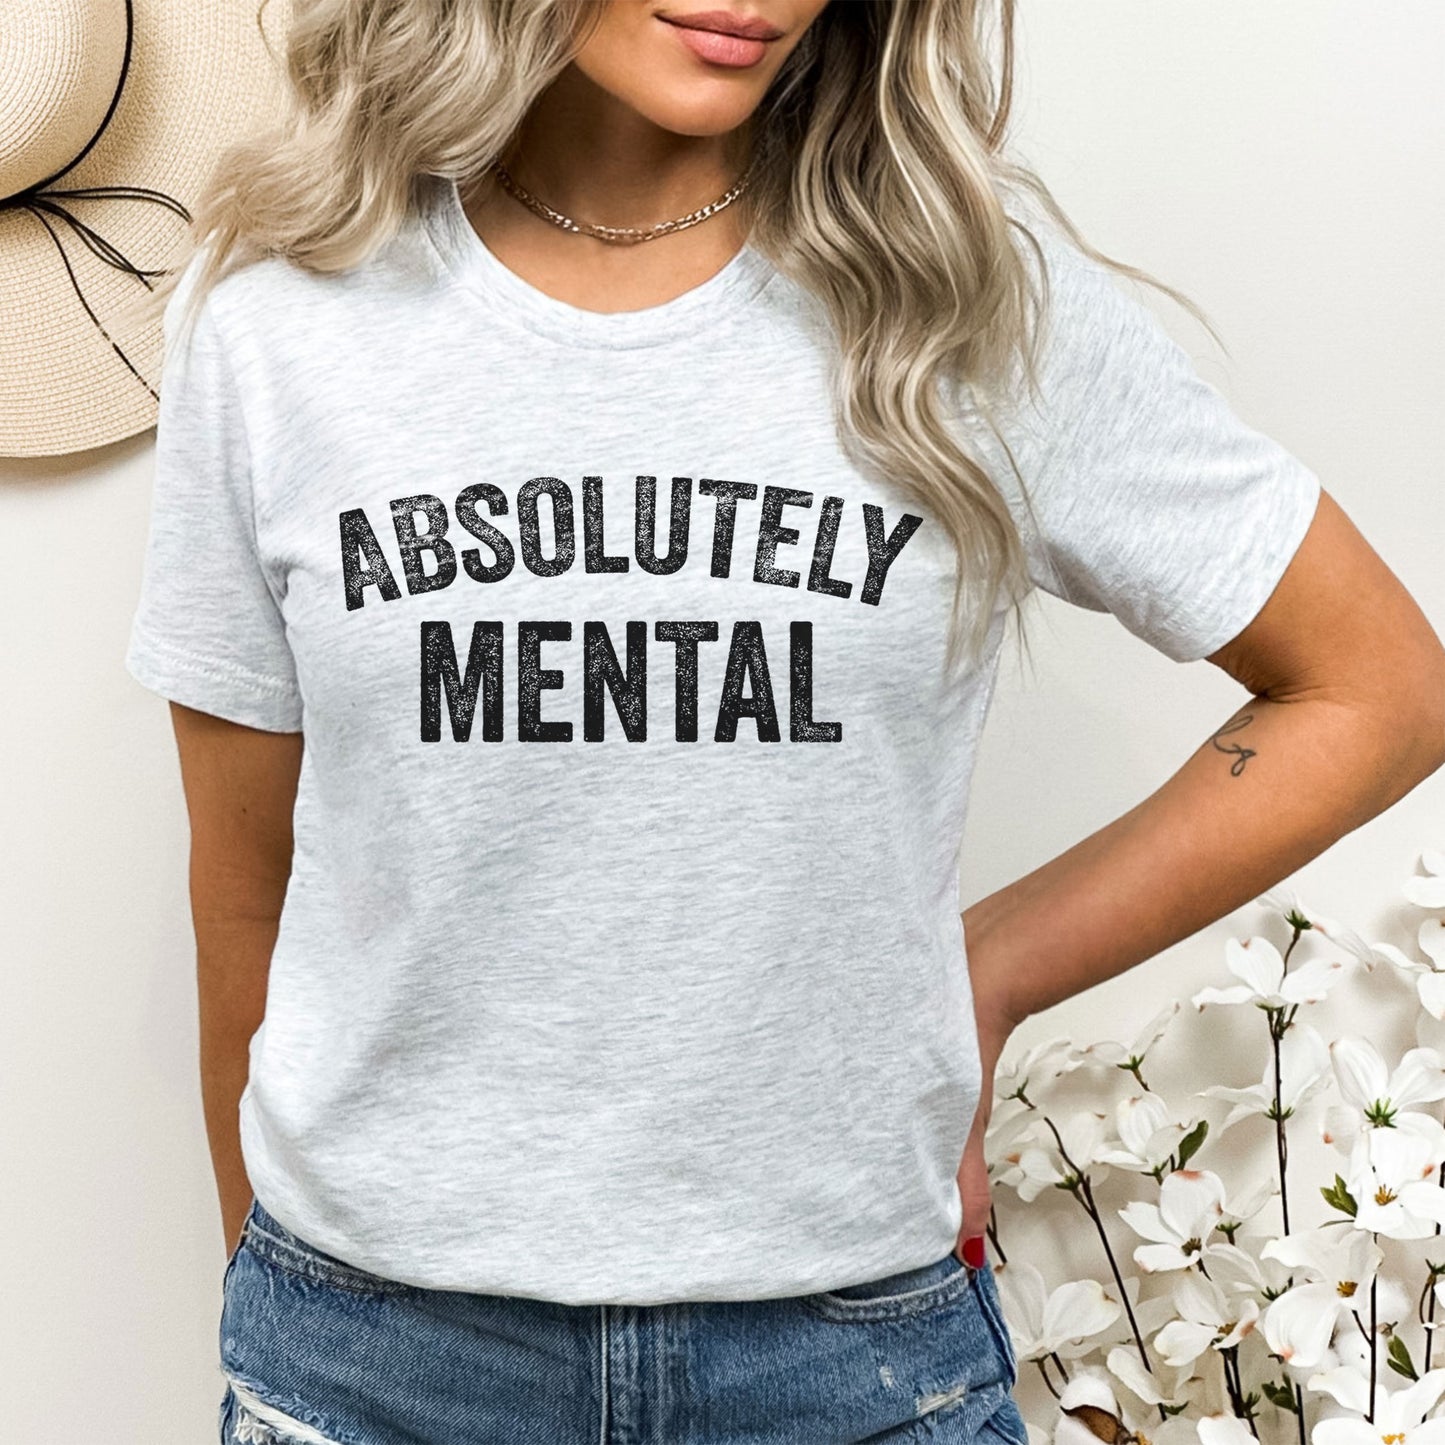 Absolutely Mental, Funny Sayings Mental Health Therapist PNG, Sublimation PNG Digital Downloads